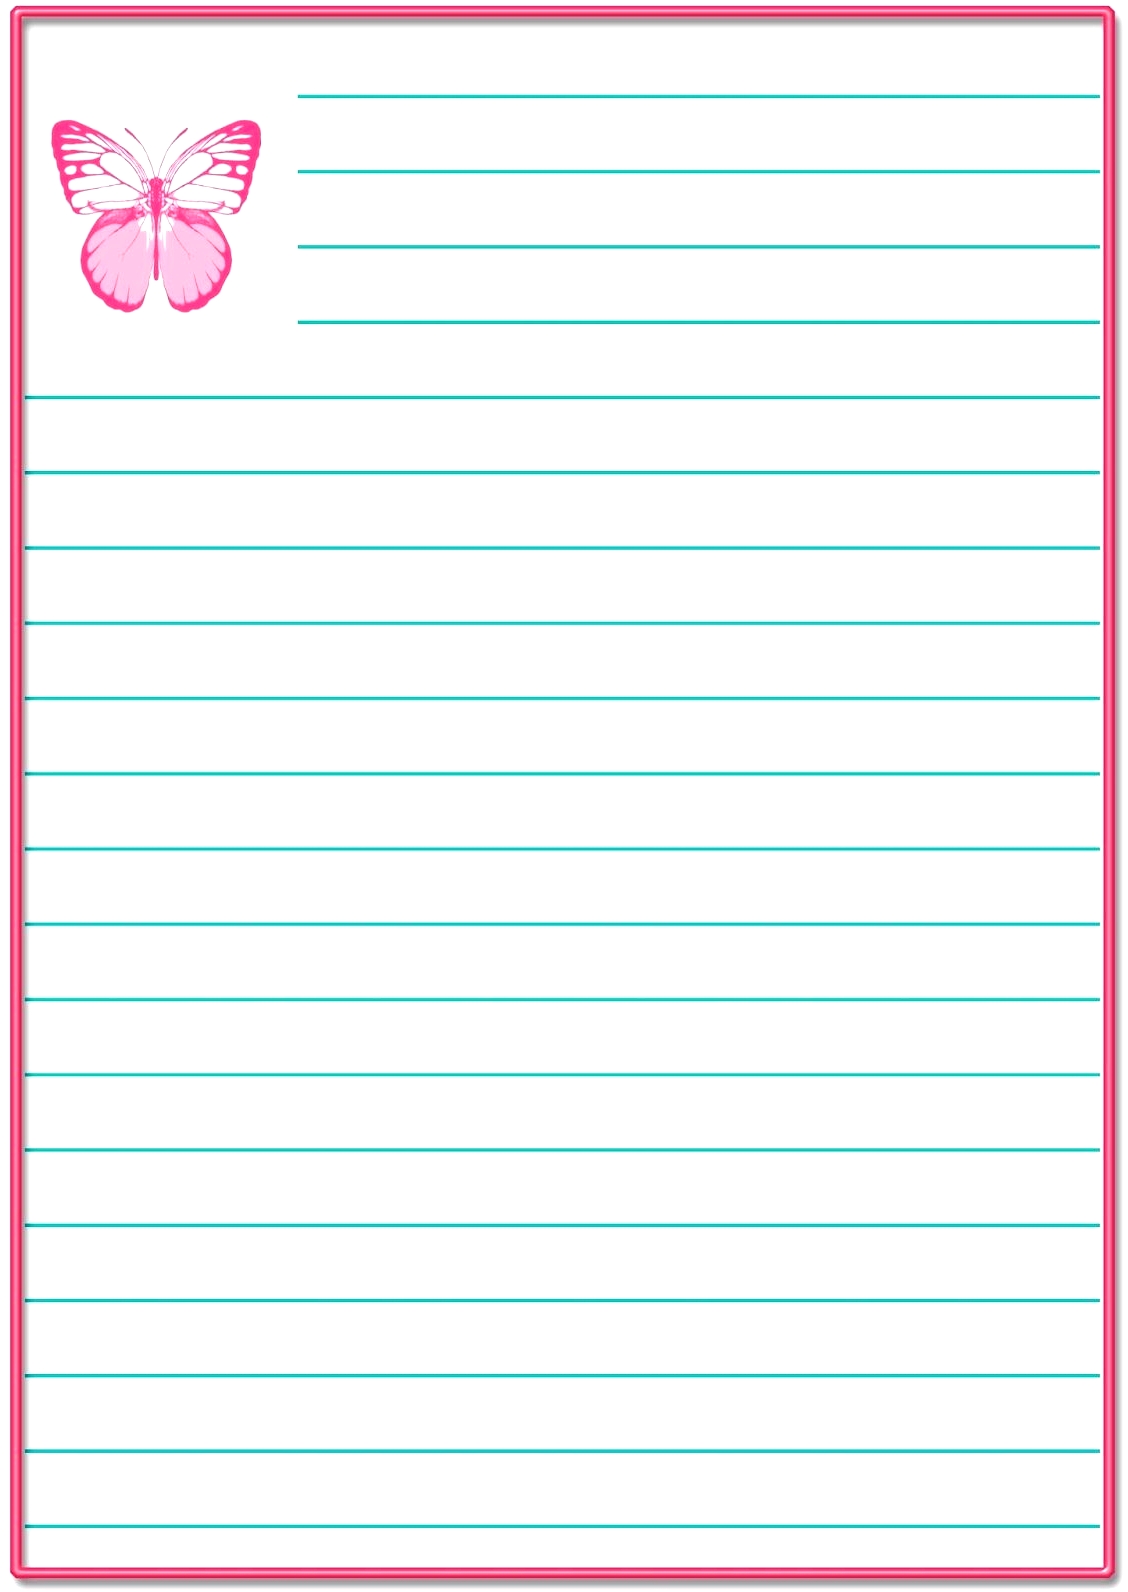 printable-stationary-paper-with-lines-get-what-you-need-for-free